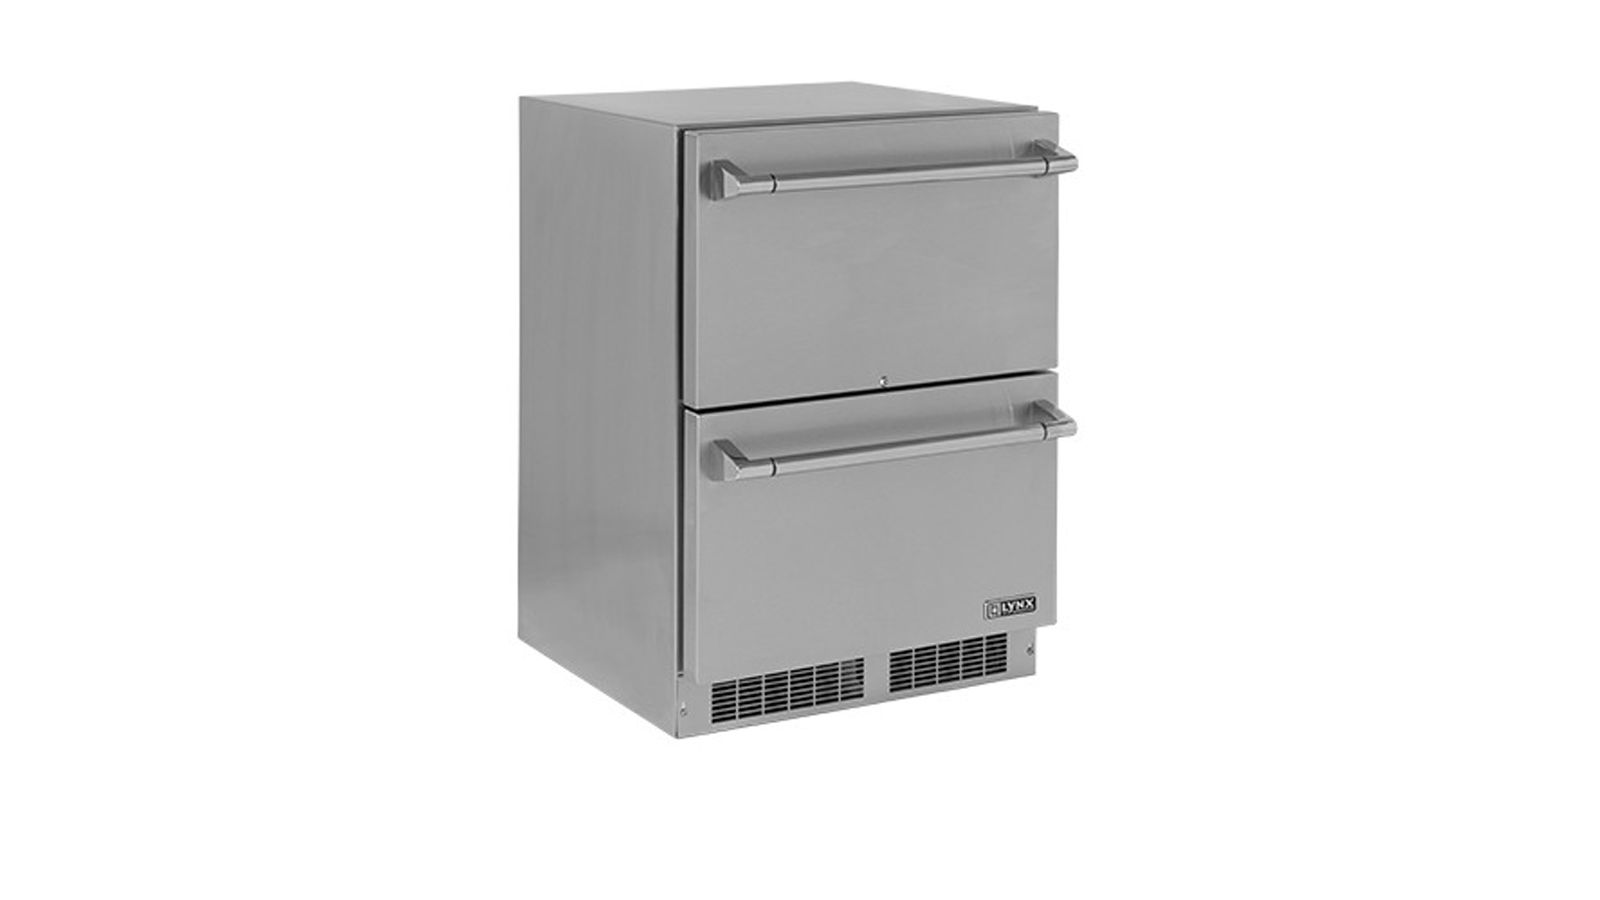 24” DOUBLE DRAWER OUTDOOR REFRIGERATOR by Lynx